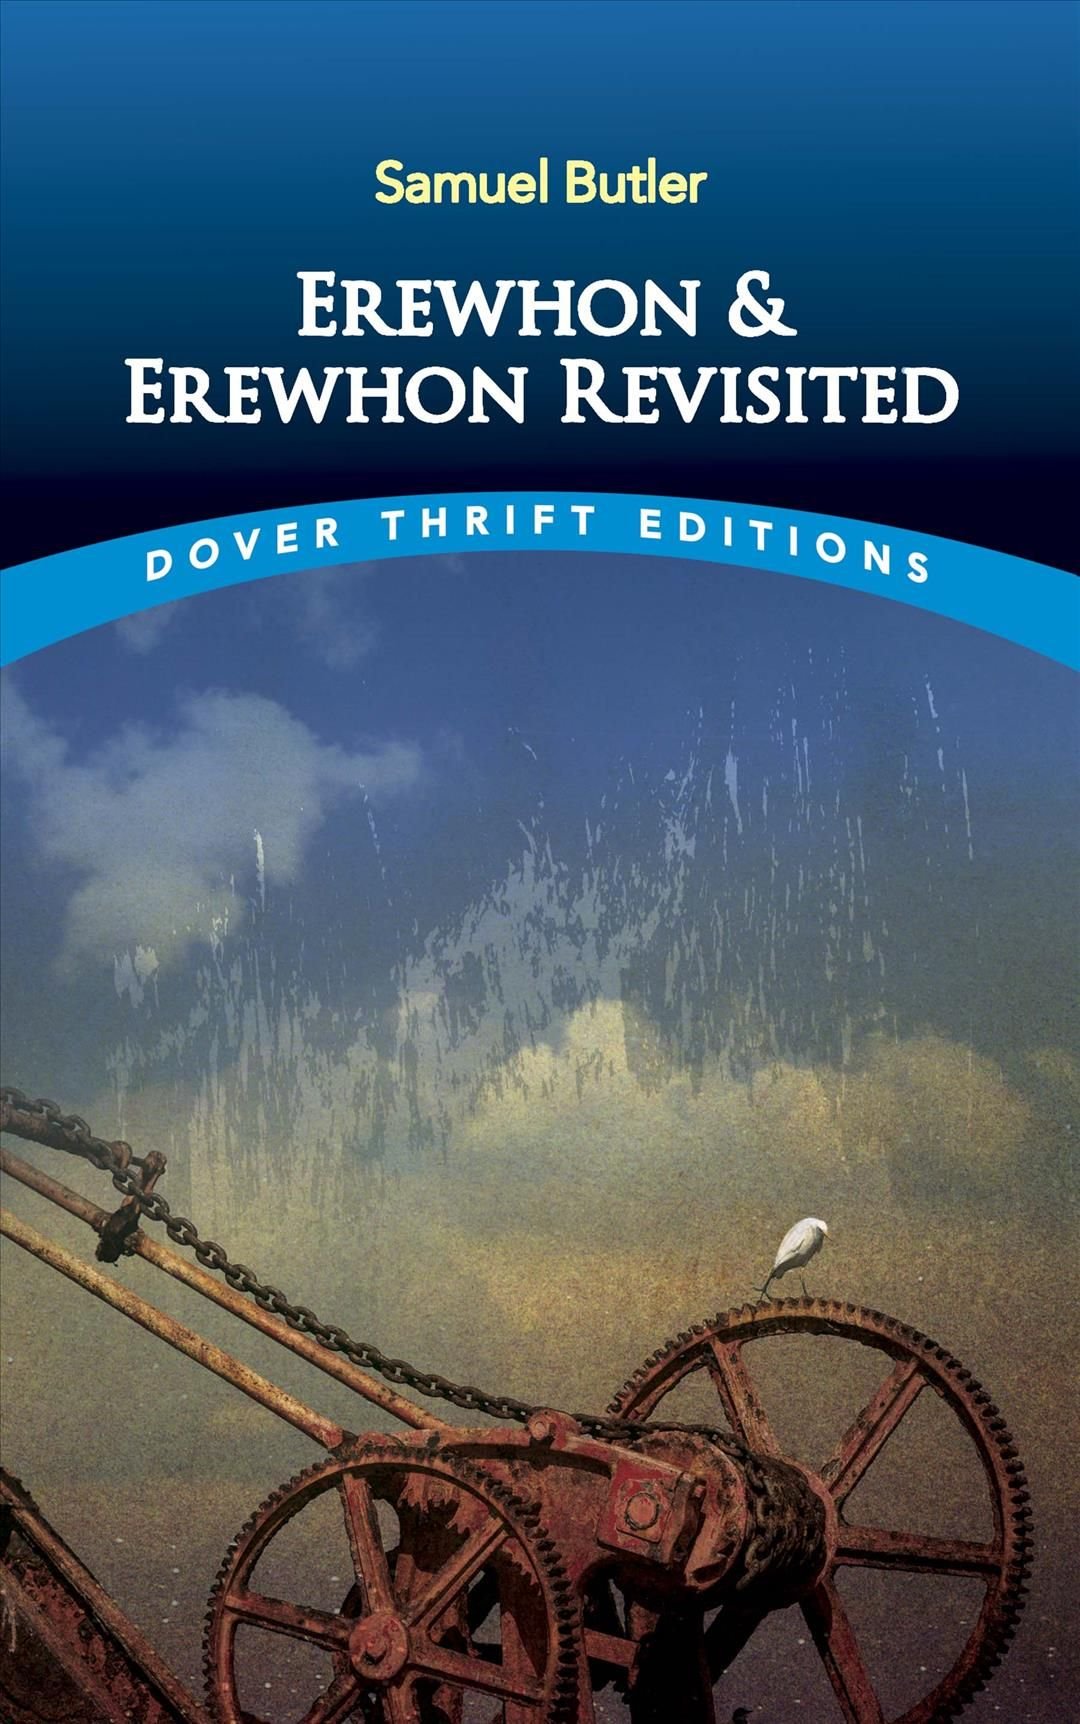 Buy Erewhon And Erewhon Revisited By Samuel Butler With Free Delivery Wordery Com